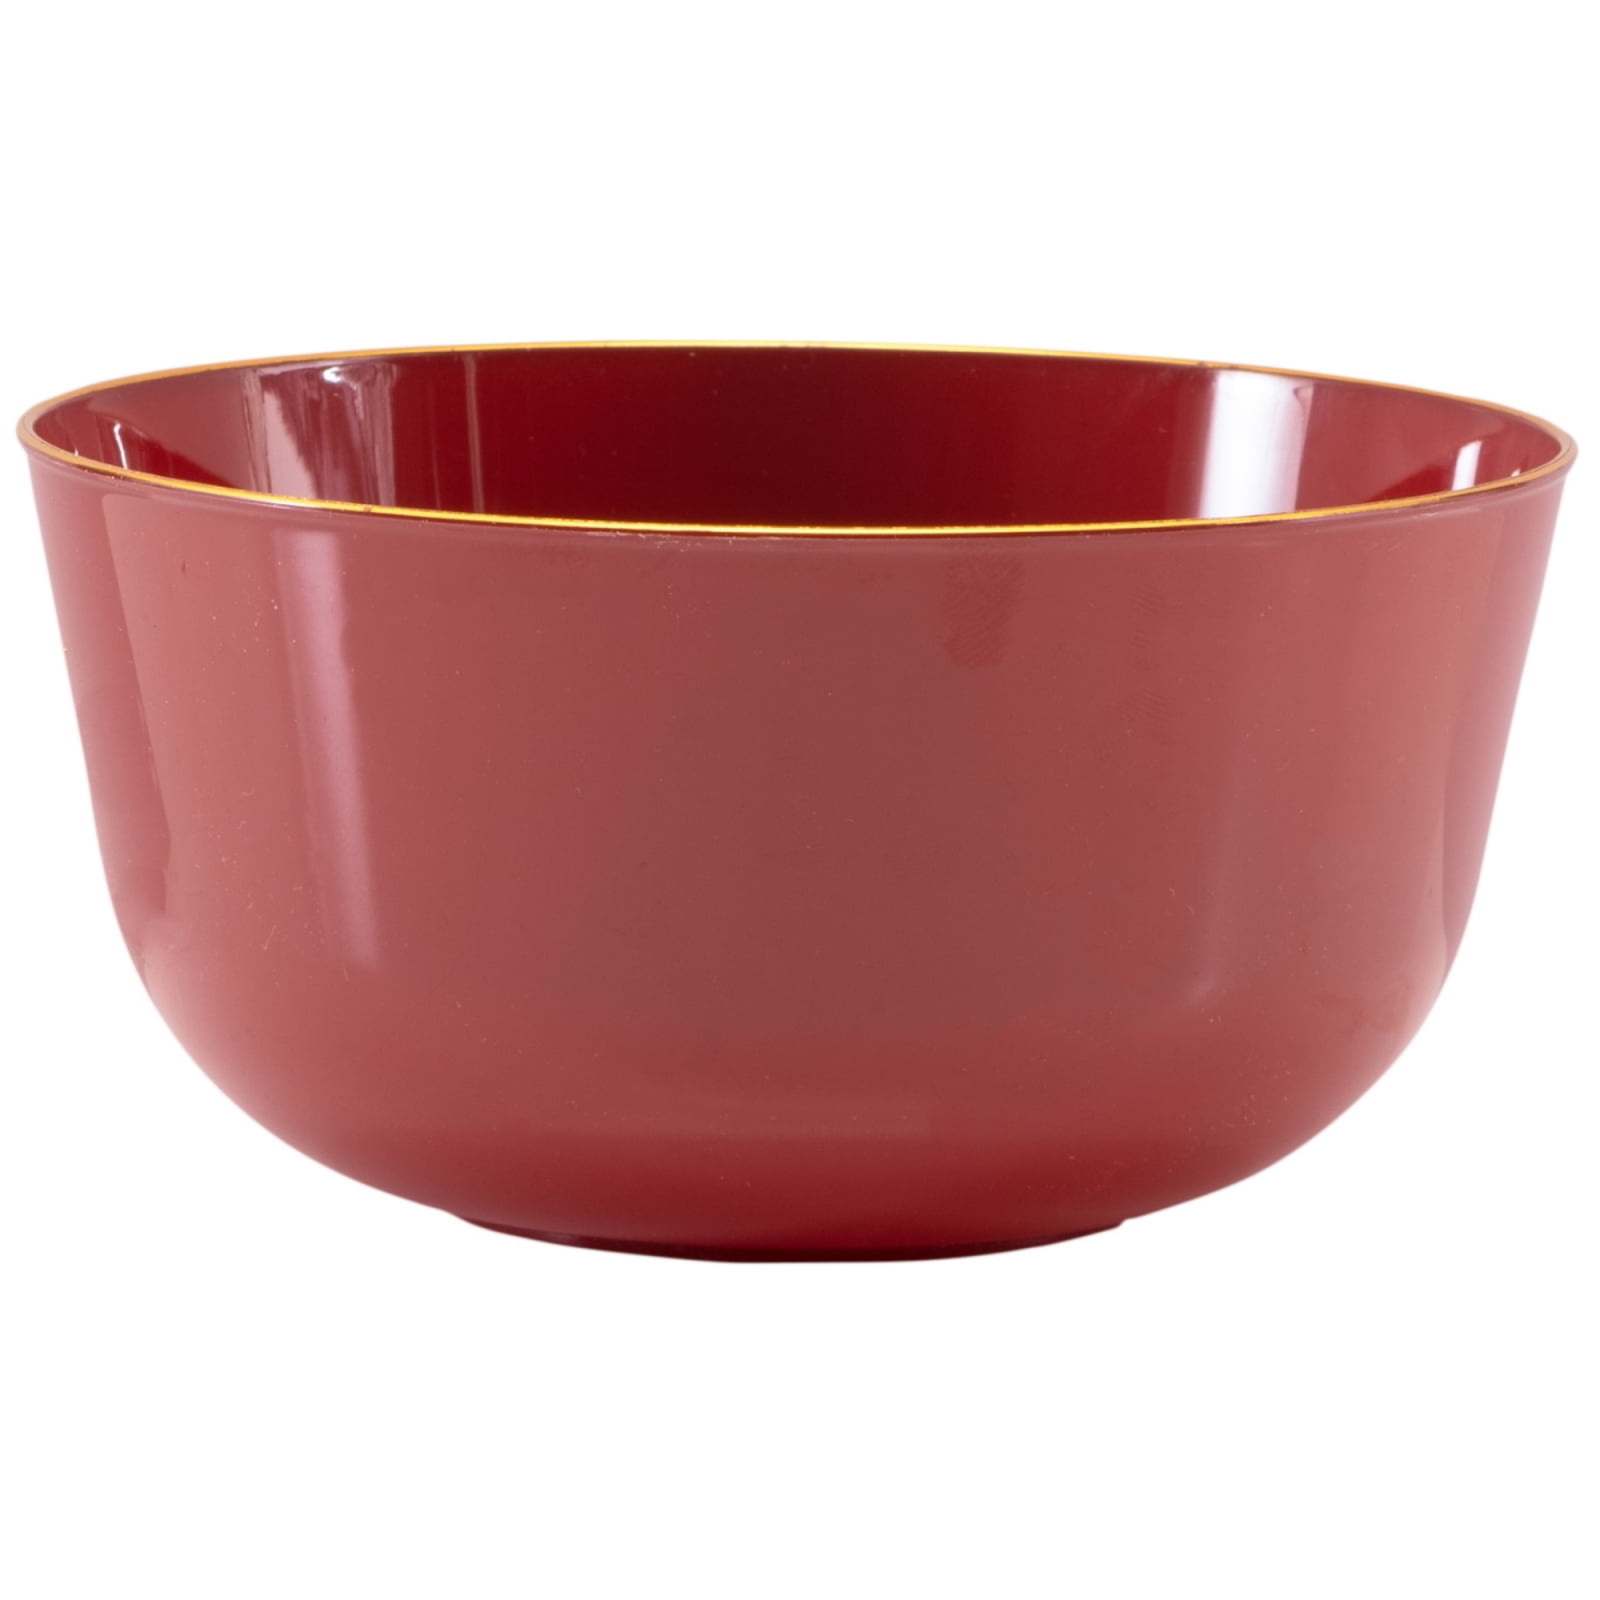 Restaurantware RWP0221B 200 Count 24 oz Microwavable PP Asian Panda Bowl and Red with Lid, Medium, Black